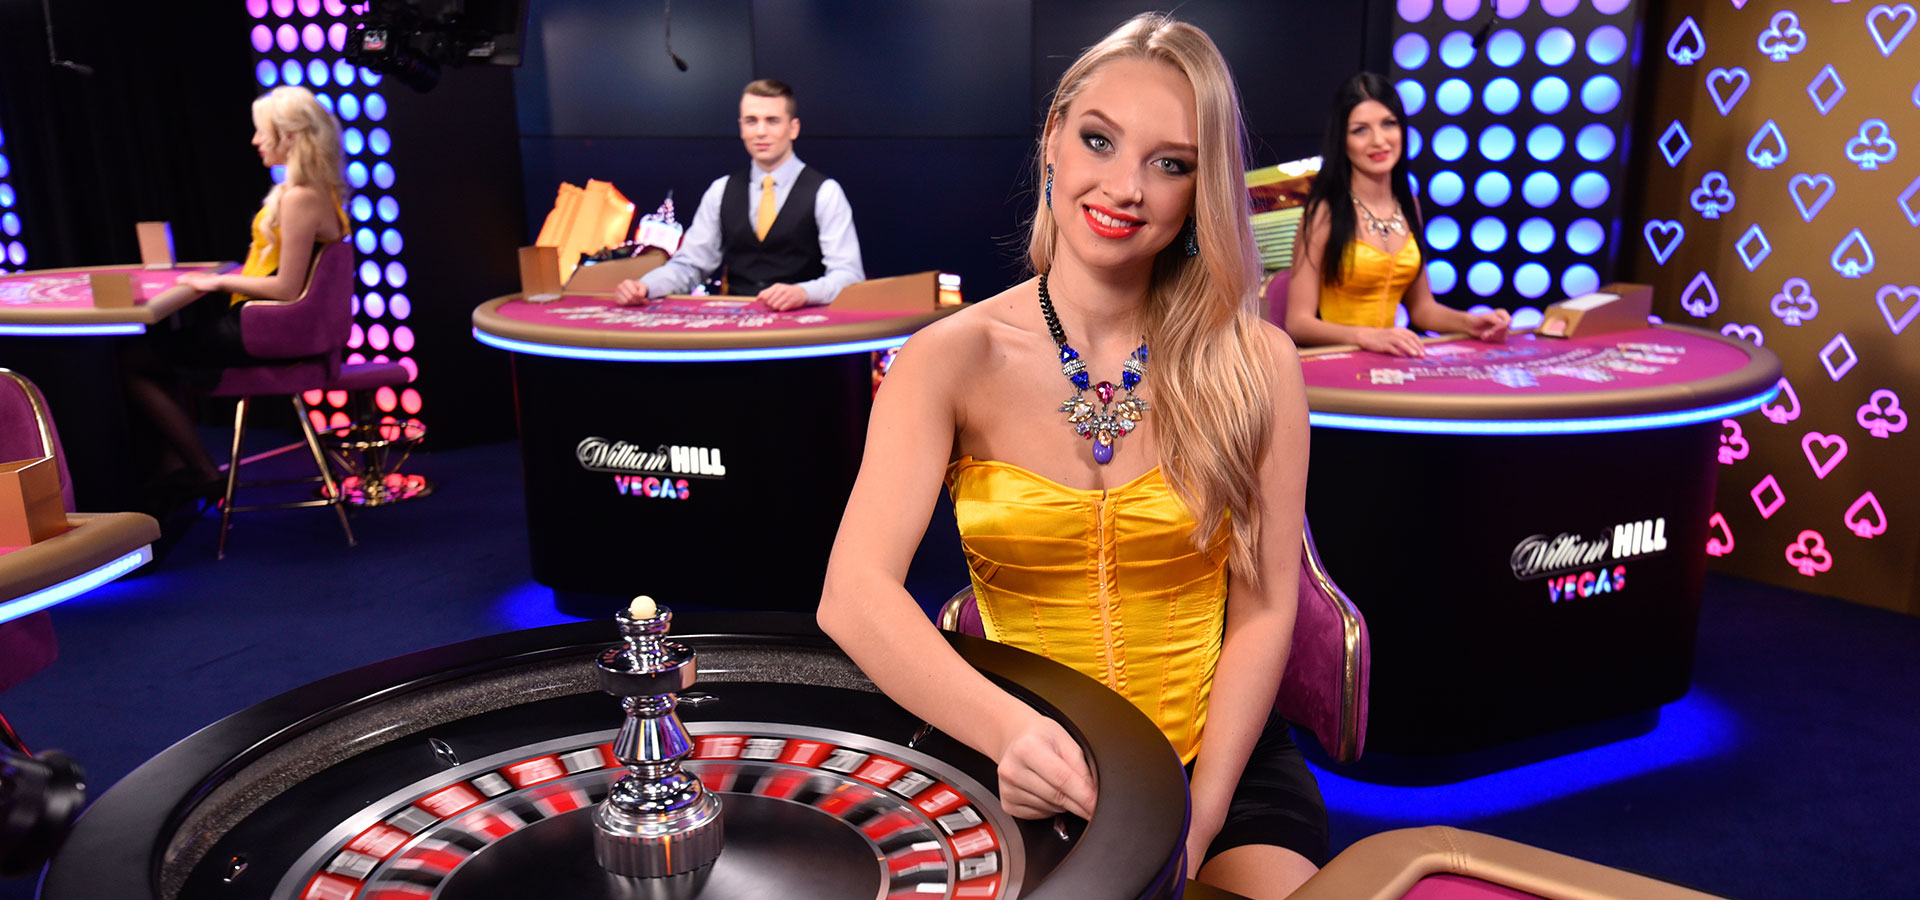 Why You Should Consider Being In Online Casino